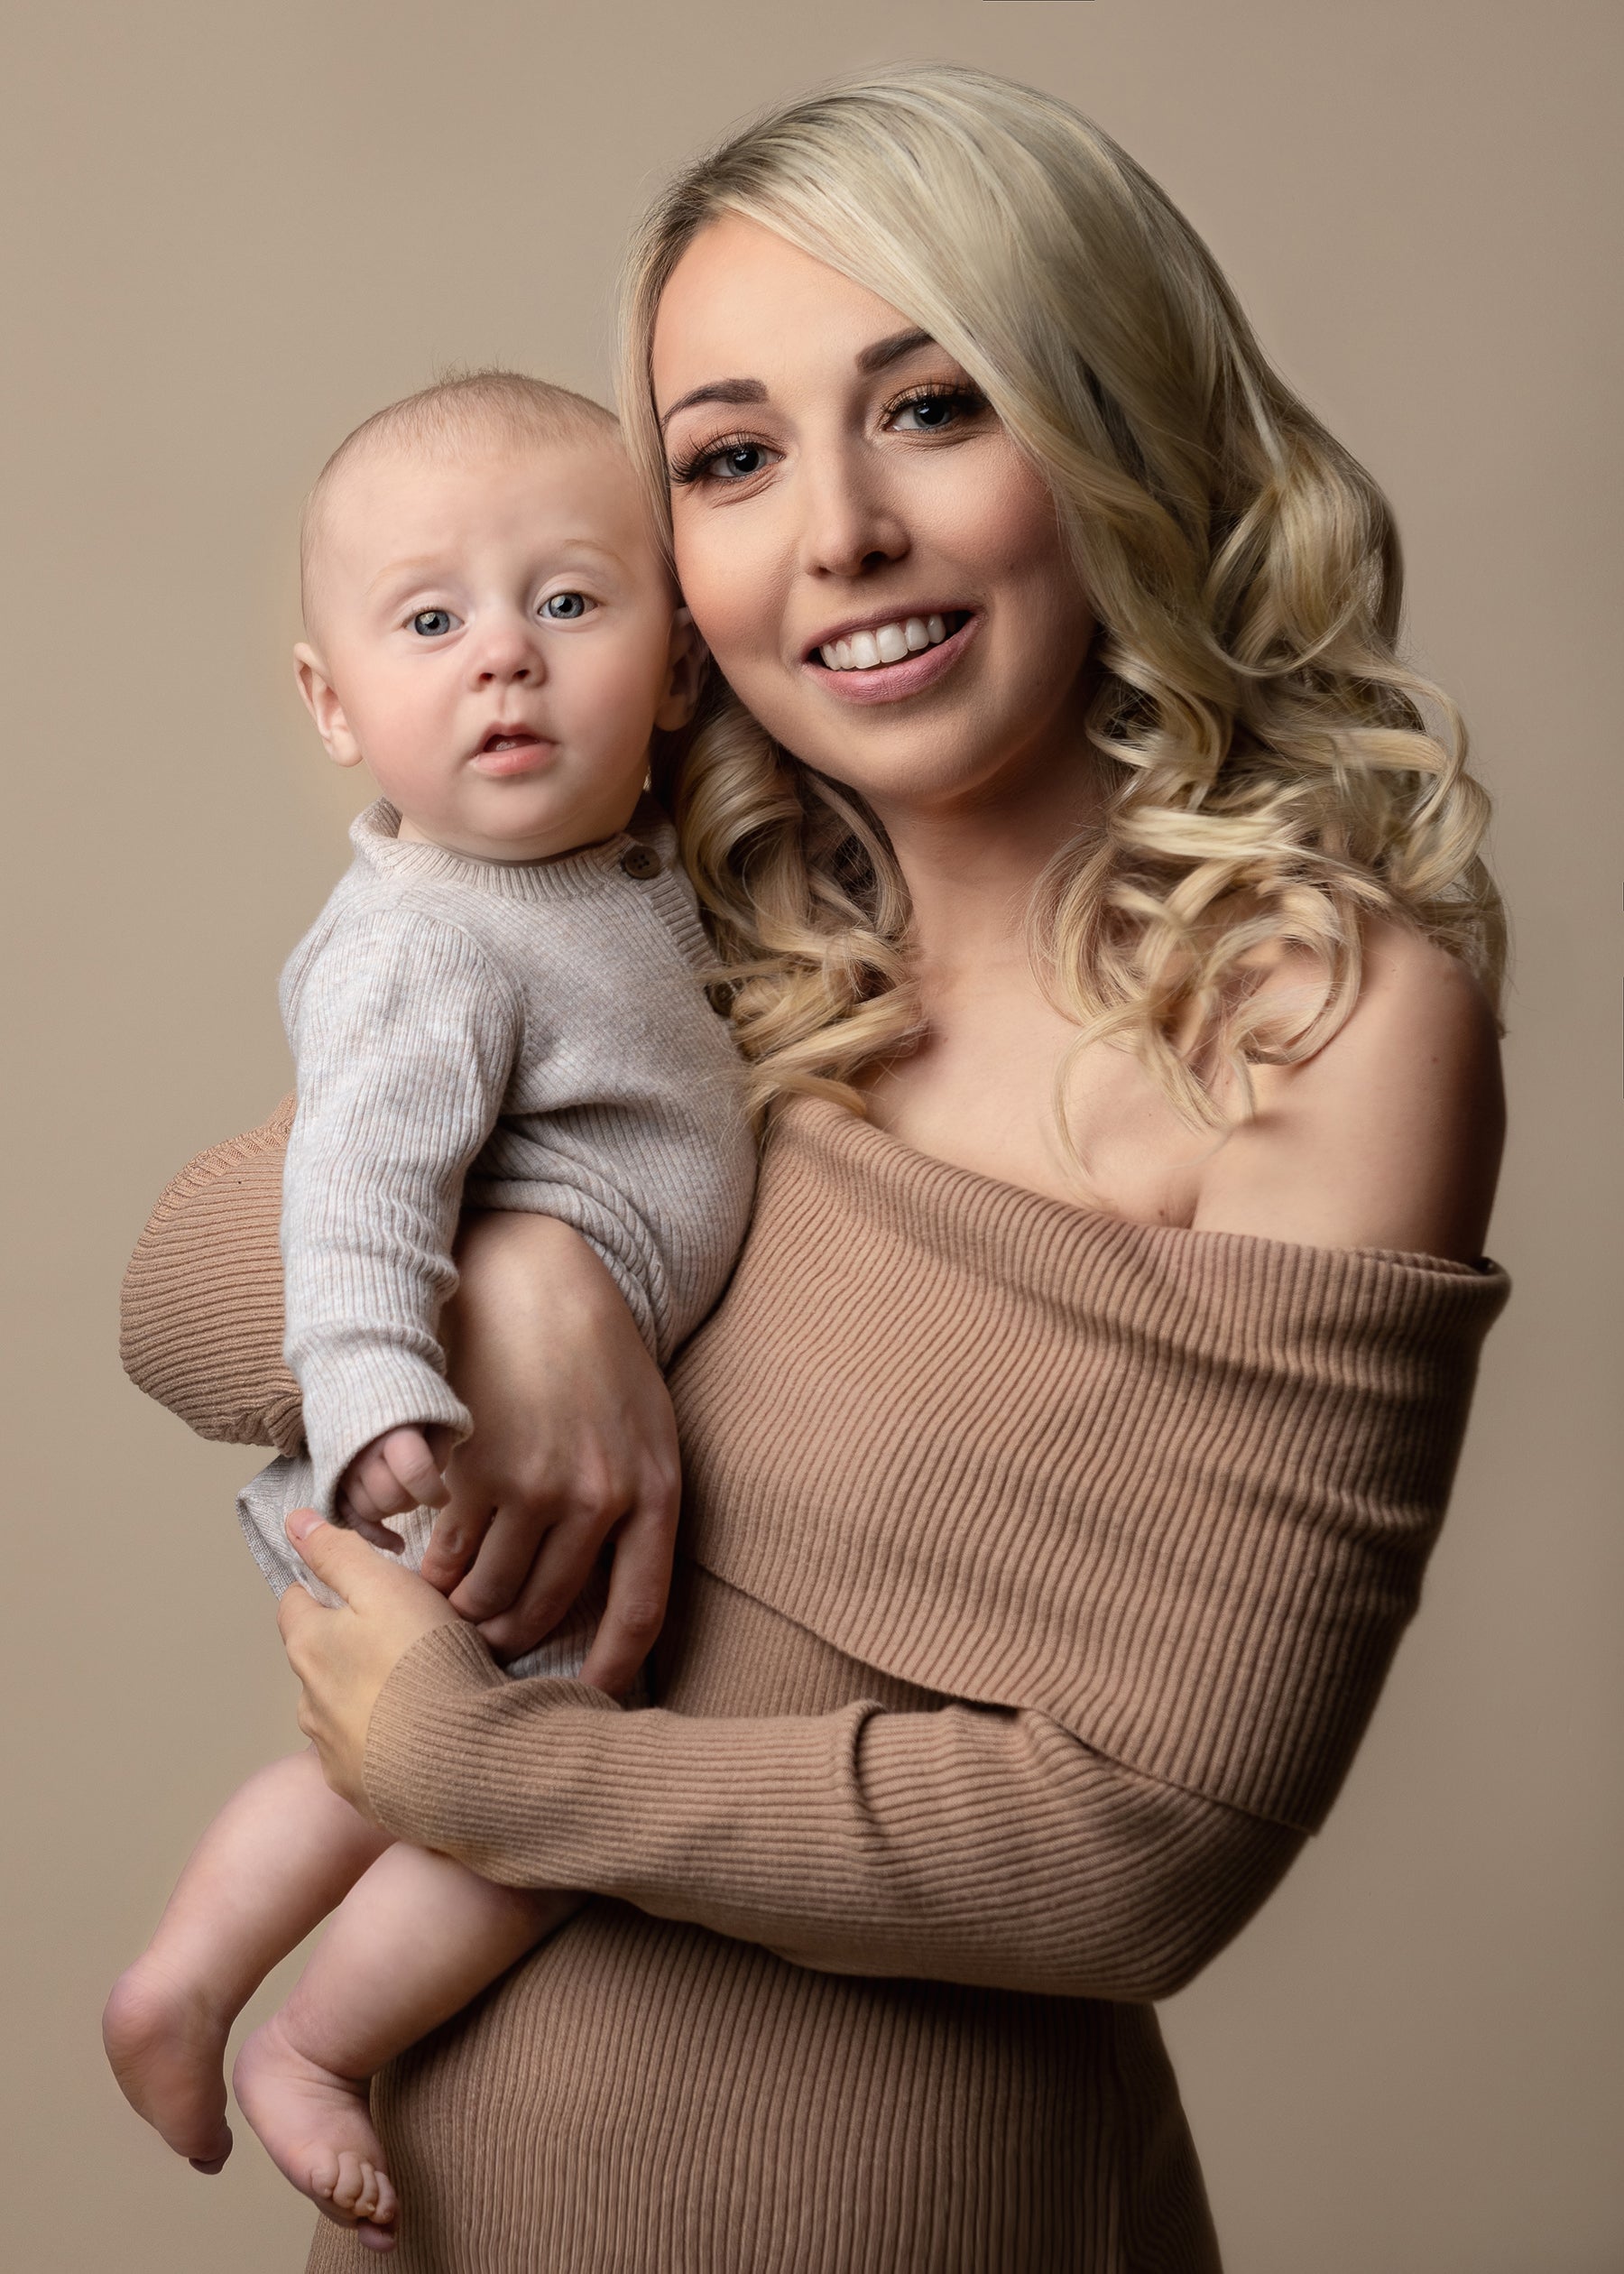 Professional mummy and me photography photos by Claire Hill Photography. Studio based in  Perton Wolverhampton West Midlands and Shropshire book today